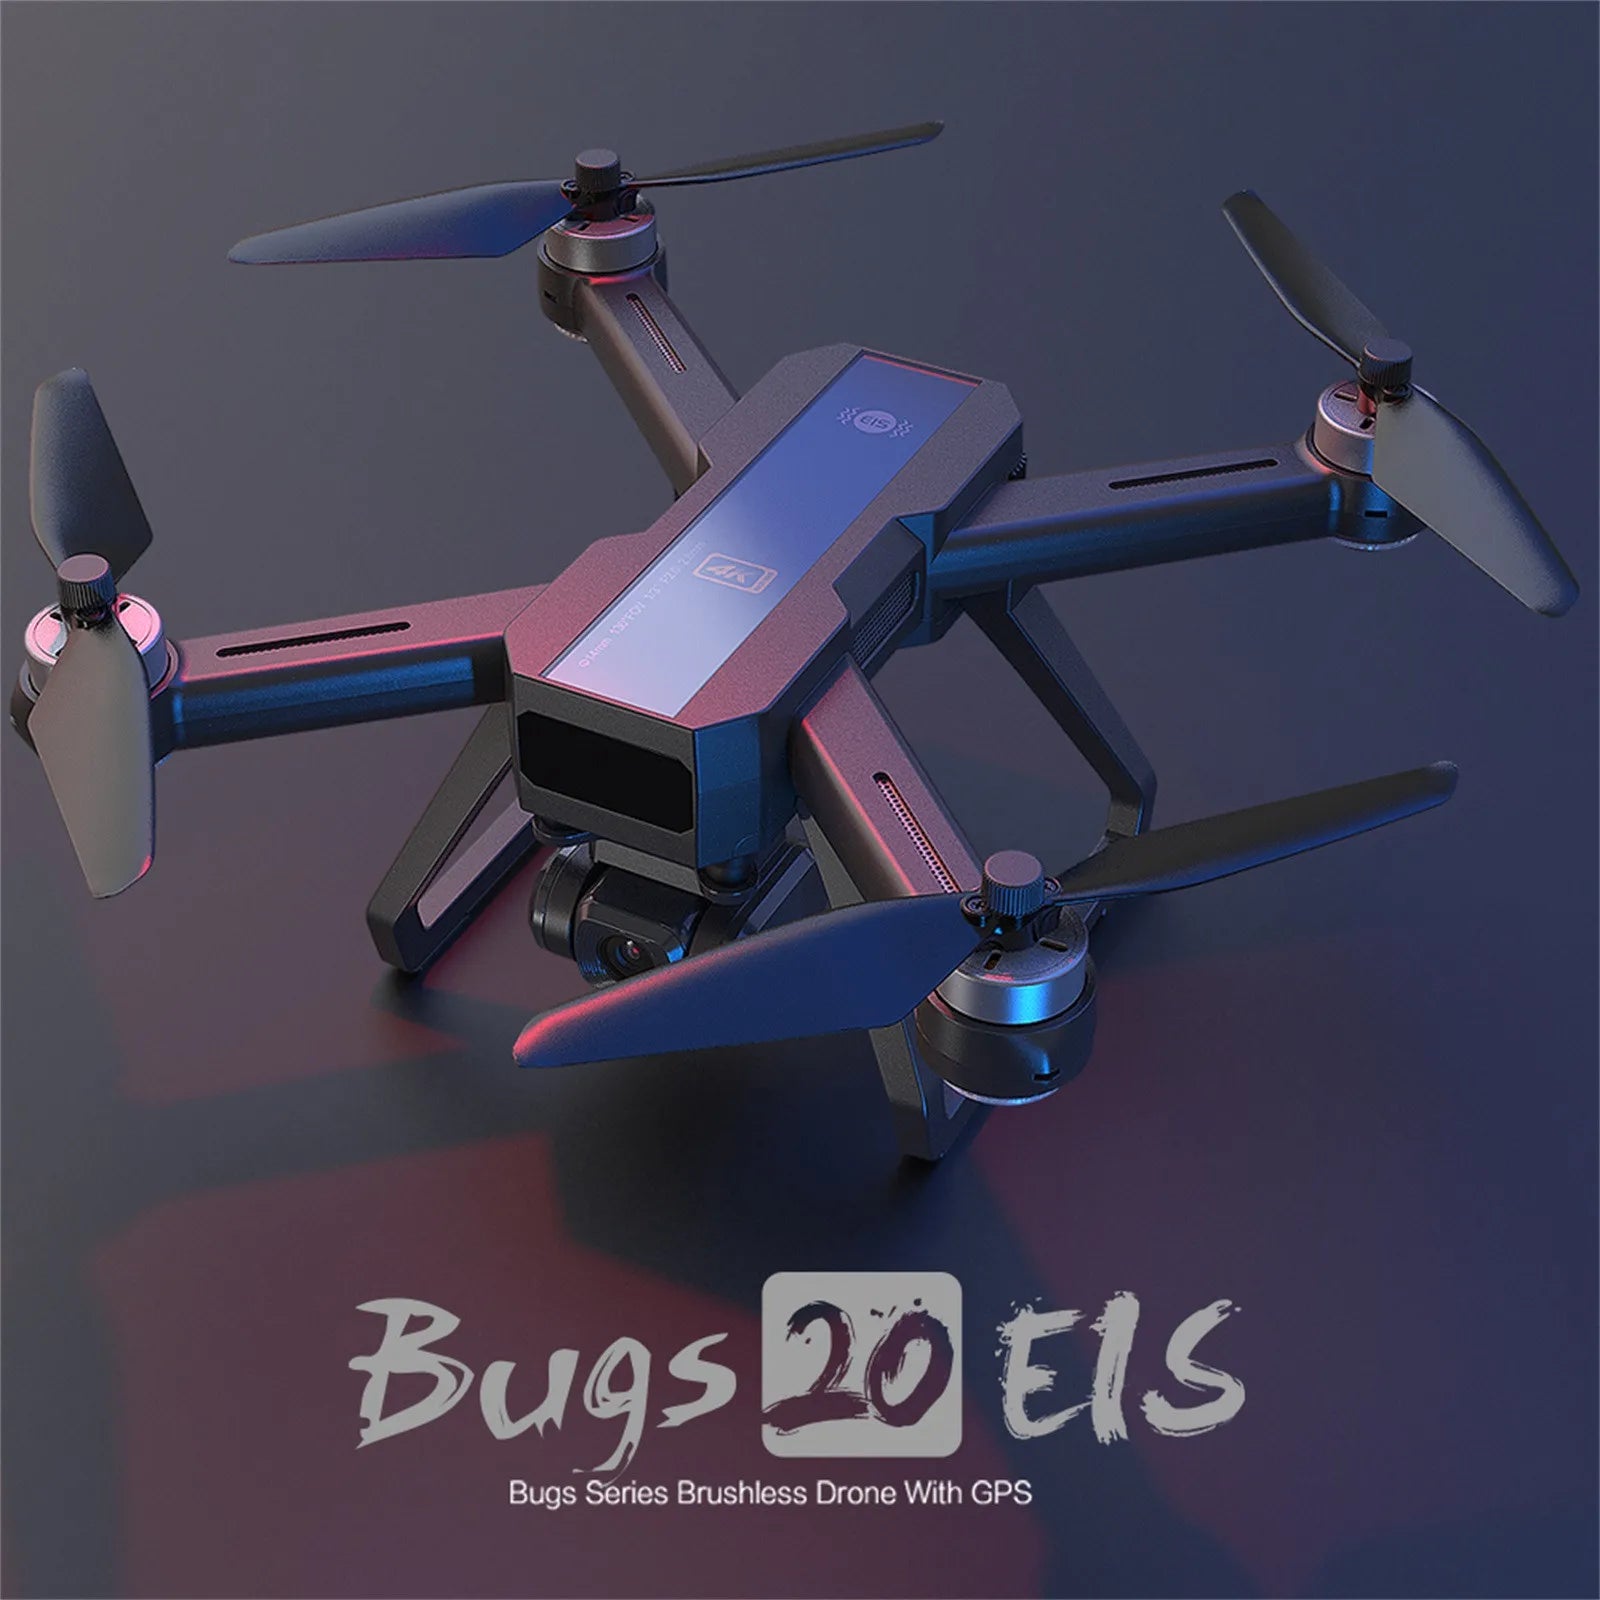 Mjx Bugs 20 Drone, BugsDoeis Series Brushless Drone With GPS Bug